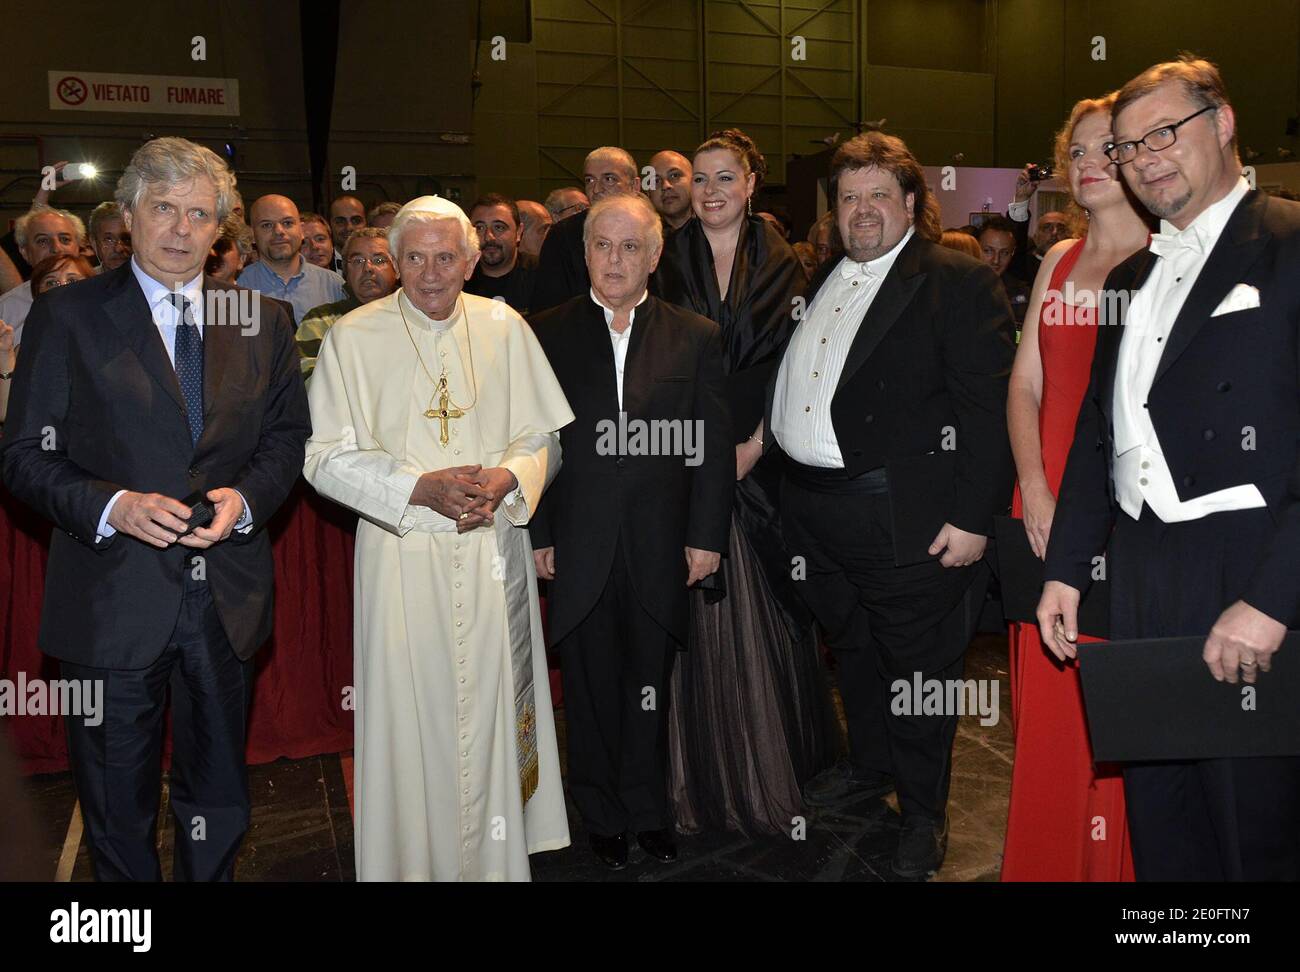 Pope Benedict XVI, Stephane Lissner (left) Scala's director and Daniel Barenboim pose at the Scala opera house before the concert of Beethoven's Ninth Symphony conducted by Daniel Barenboim in Milan, Italy on June 1, 2012.Pope Benedict XVI attends the 7th World Meeting of Families. During this three-day trip in Milan he praised the family as 'the principal heritage of humankind'. It is the first time in 28 years that a pope has been to Milan, Italy's economic capital and Europe's biggest diocese with five million inhabitants. Photo by ABACAPRESS.COM Stock Photo